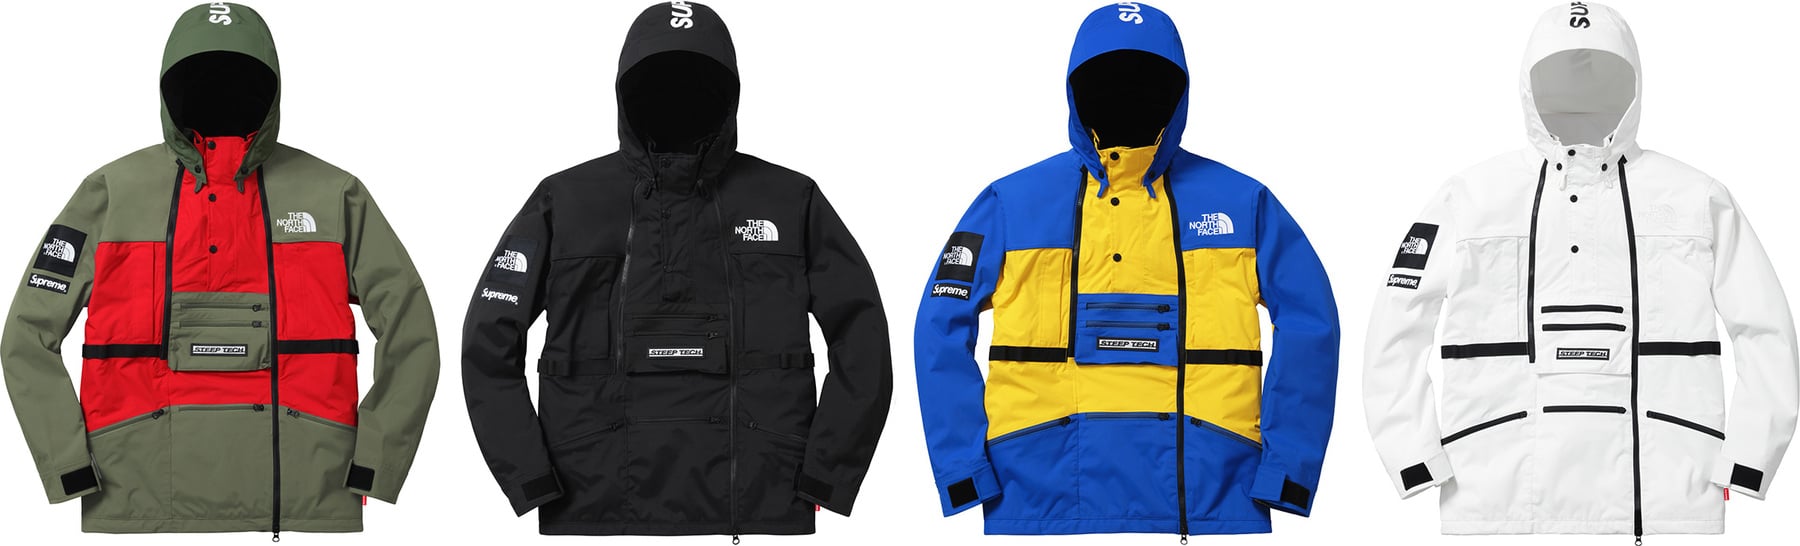 Supreme Archive TNF Steep Tech Hooded Jackets